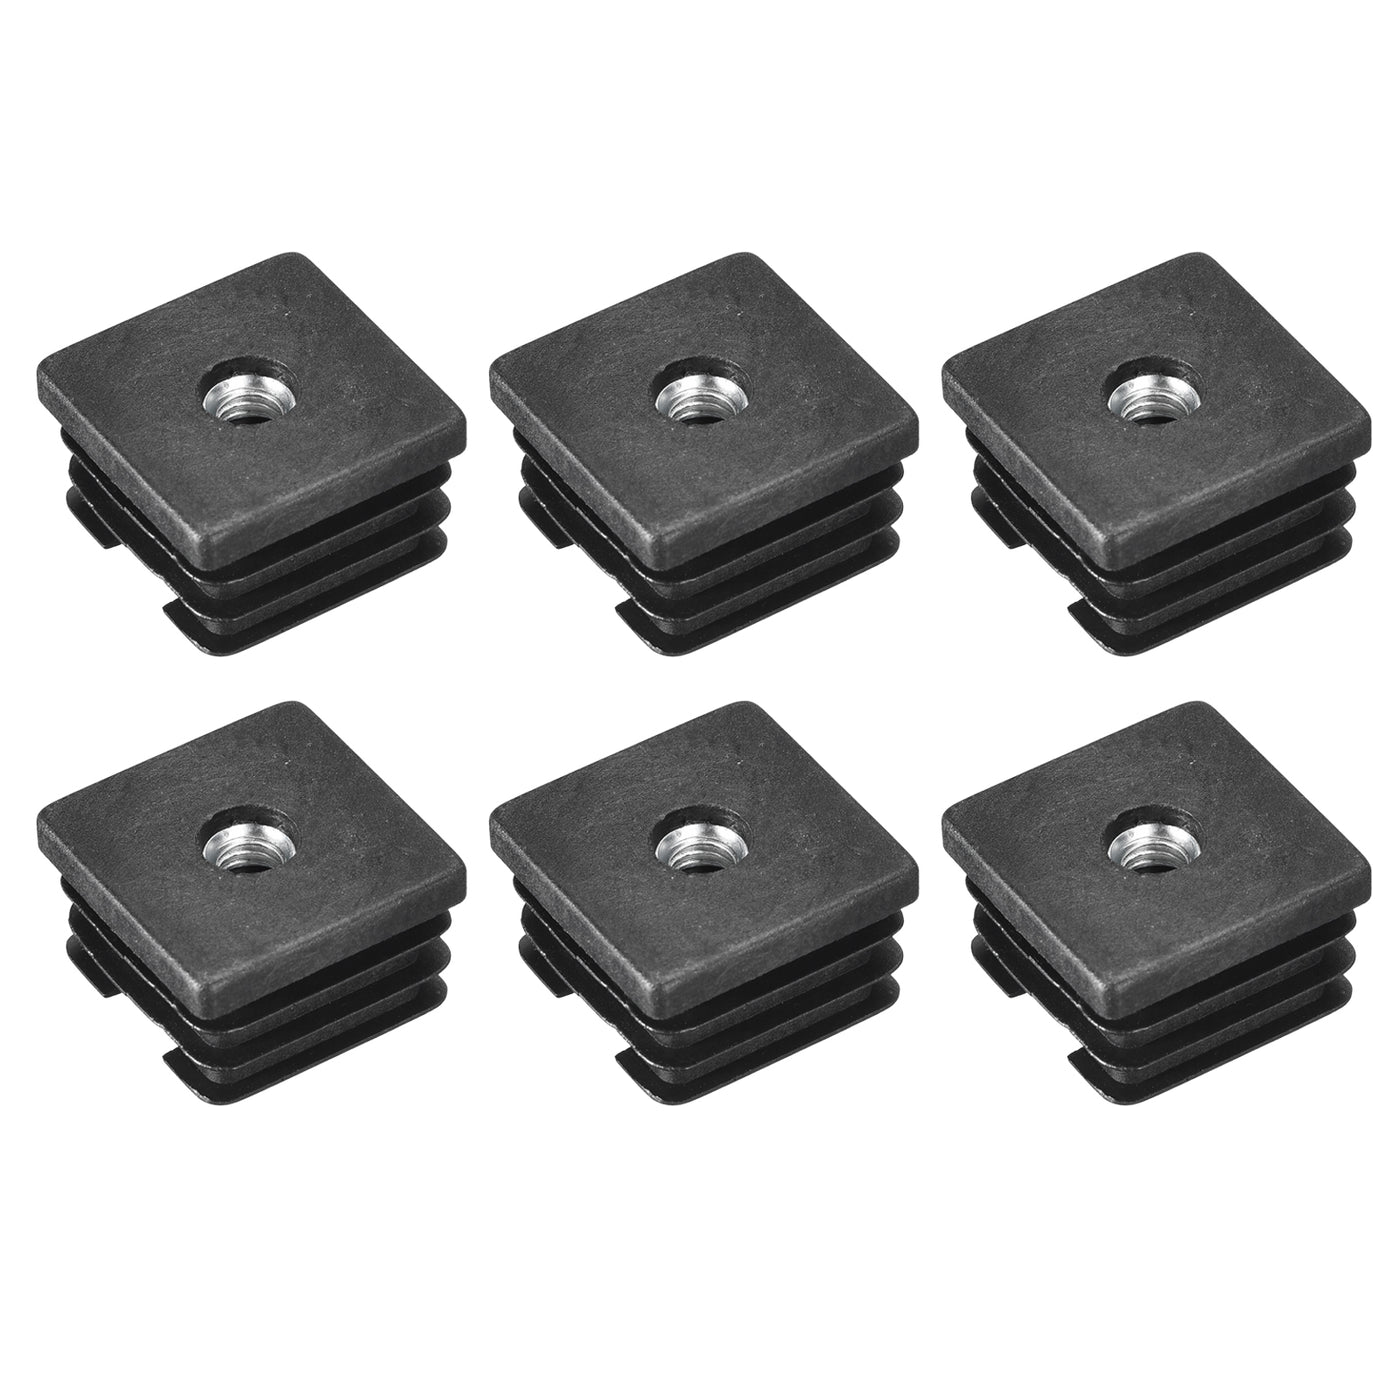 uxcell Uxcell 6Pcs 1.38"x1.38" Caster Insert with Thread, Square M8 Thread for Furniture